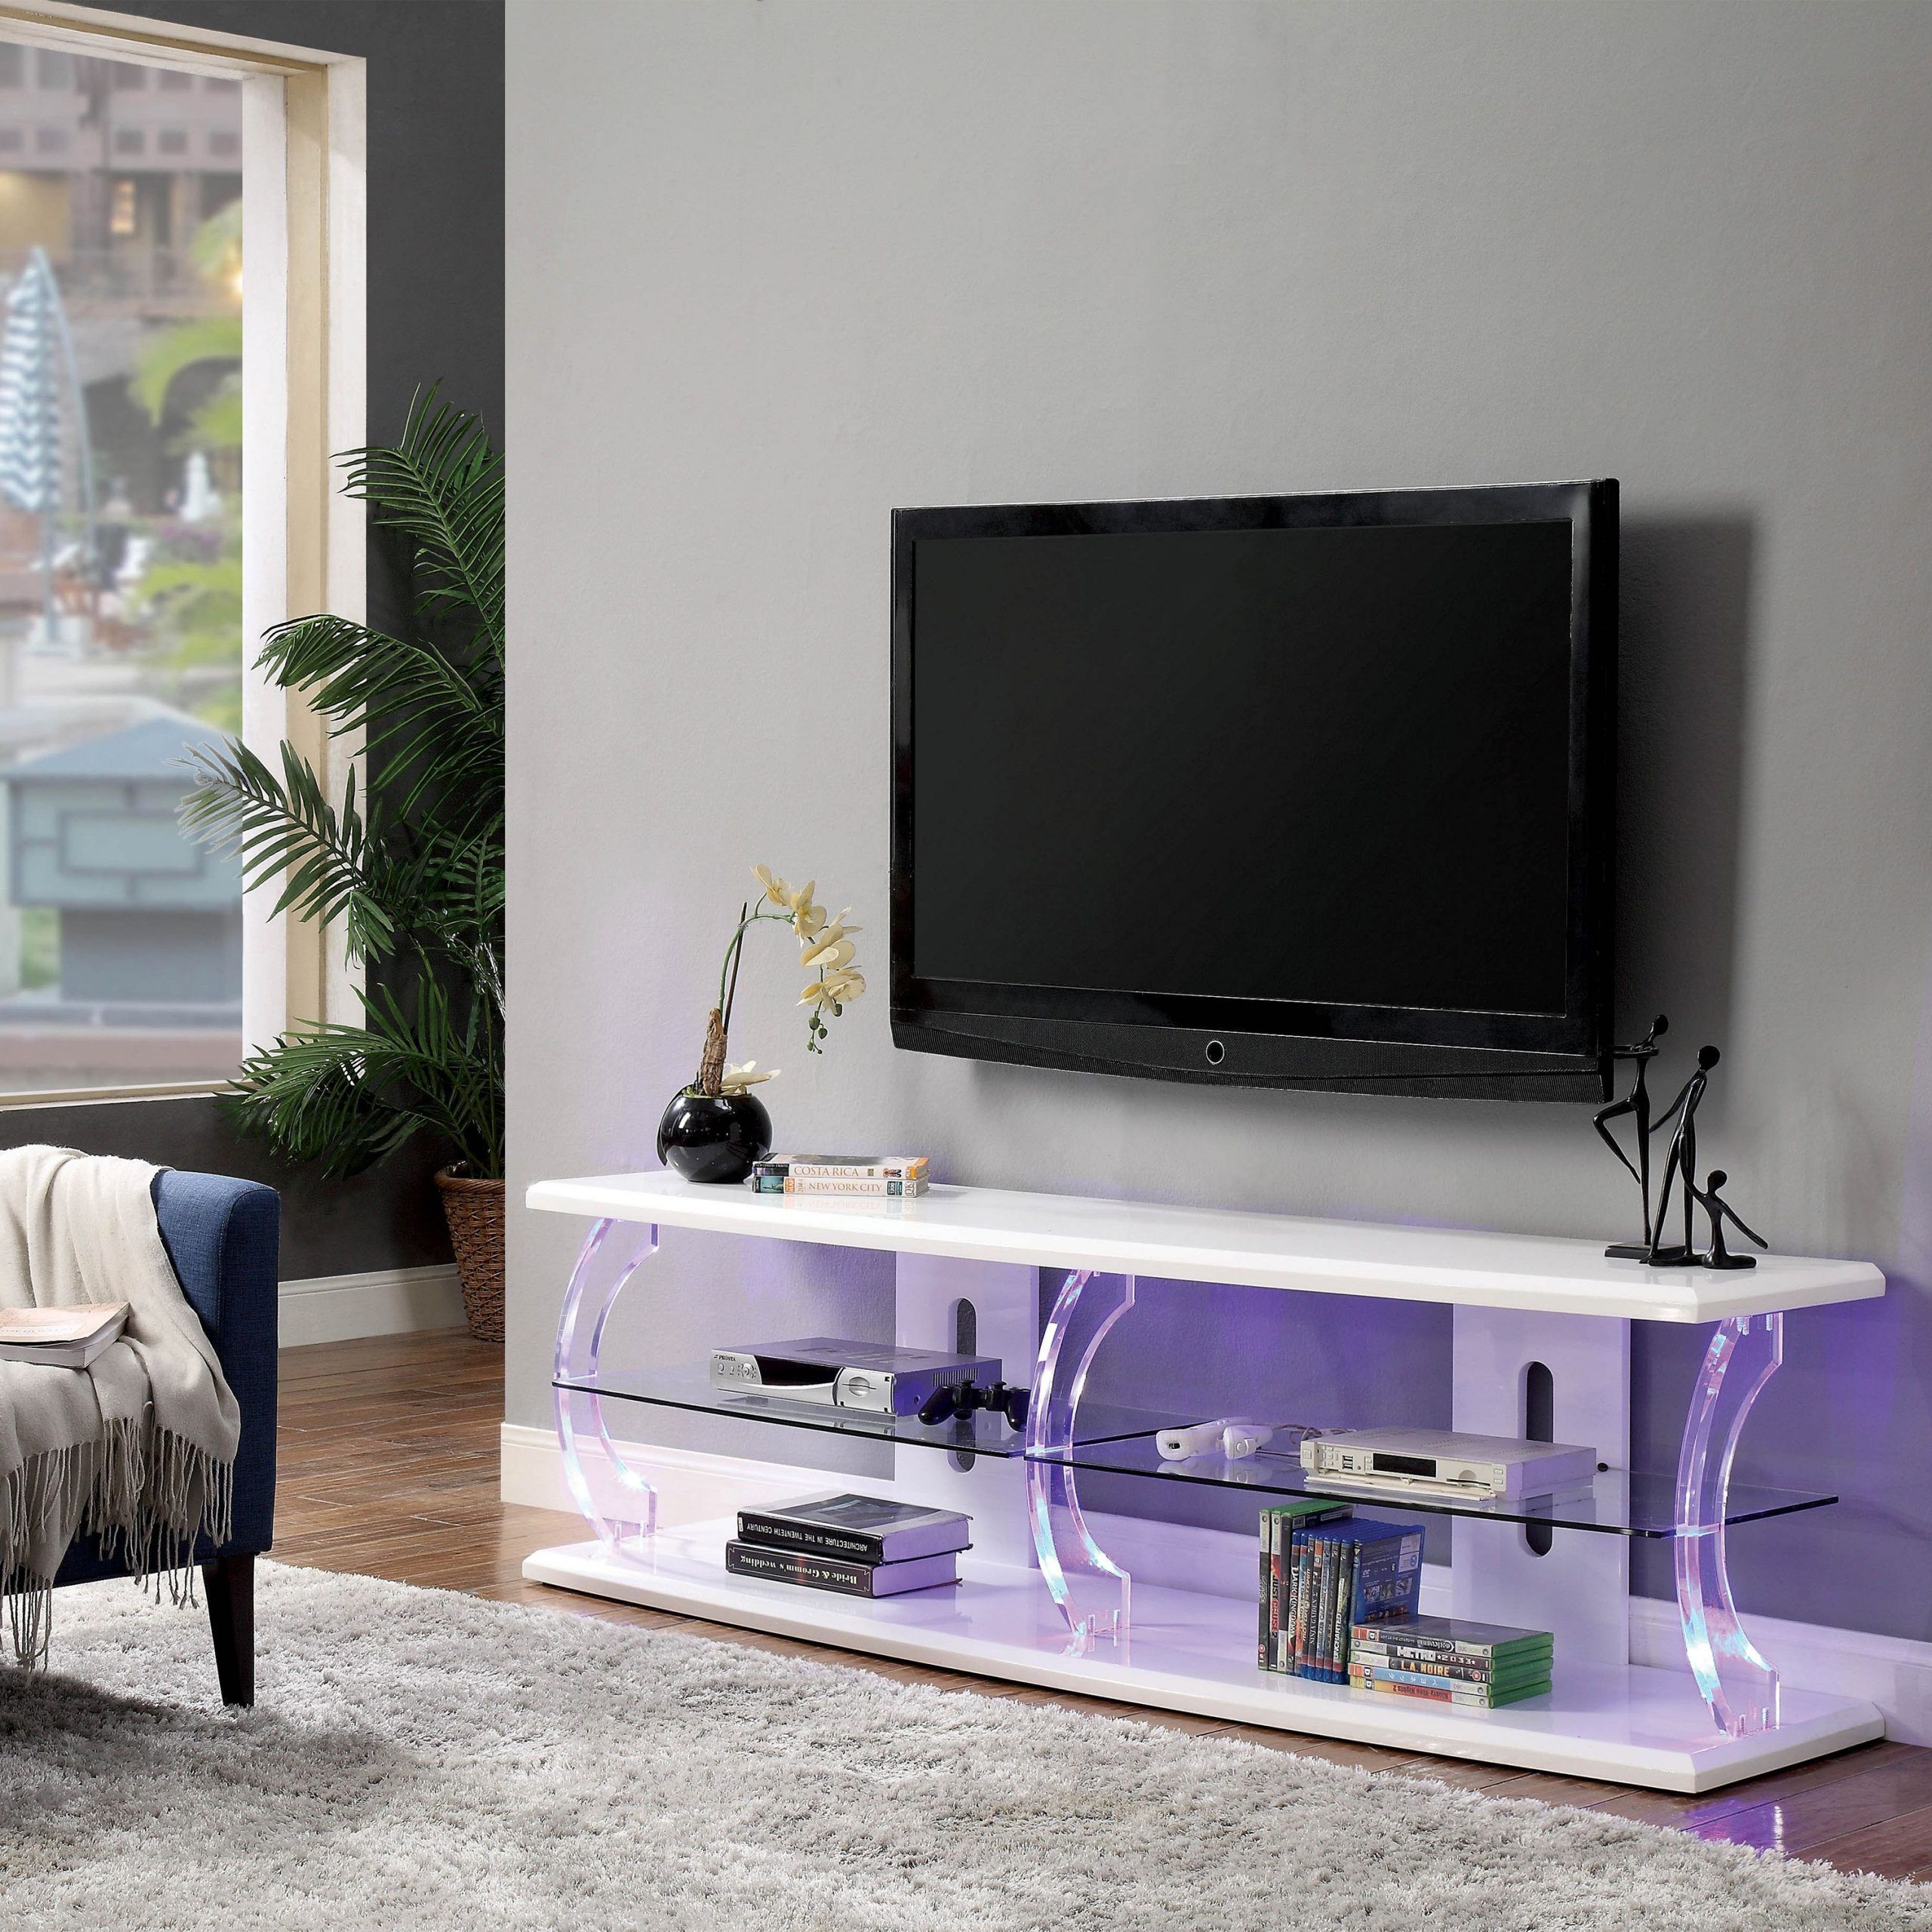 Furniture Of America Daley Modern White 60 Inch Led Tv Inside White Modern Tv Stands (View 6 of 15)